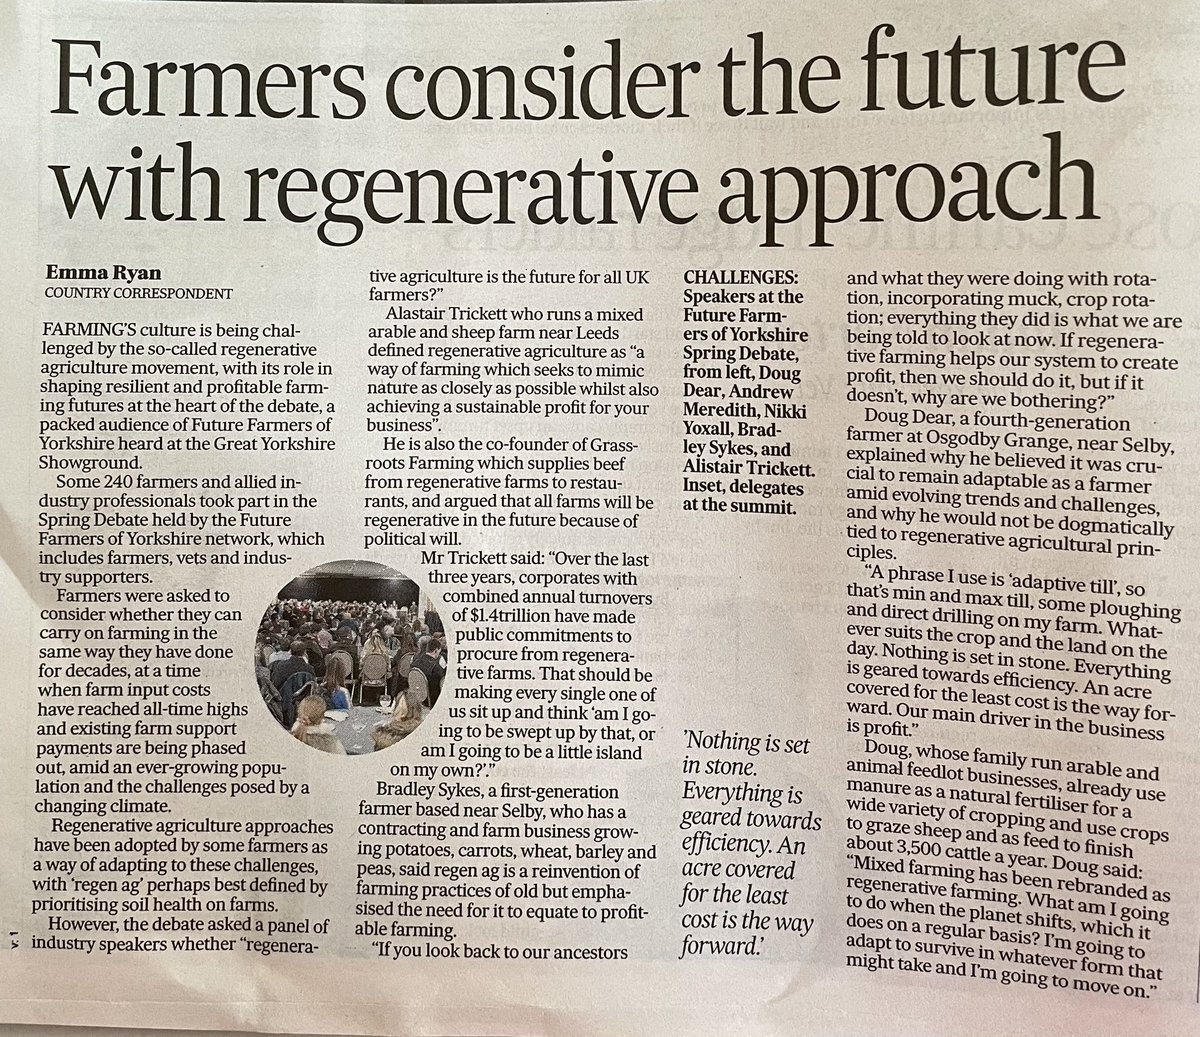 Some very good letters and articles in todays Country Post @yorkshirepost about the challenge and pressures on farmers who are trying their hardest to farm well with the resources they have. #longtermendeavour #reality #farming #food #environment @emmaloisryan #landuse